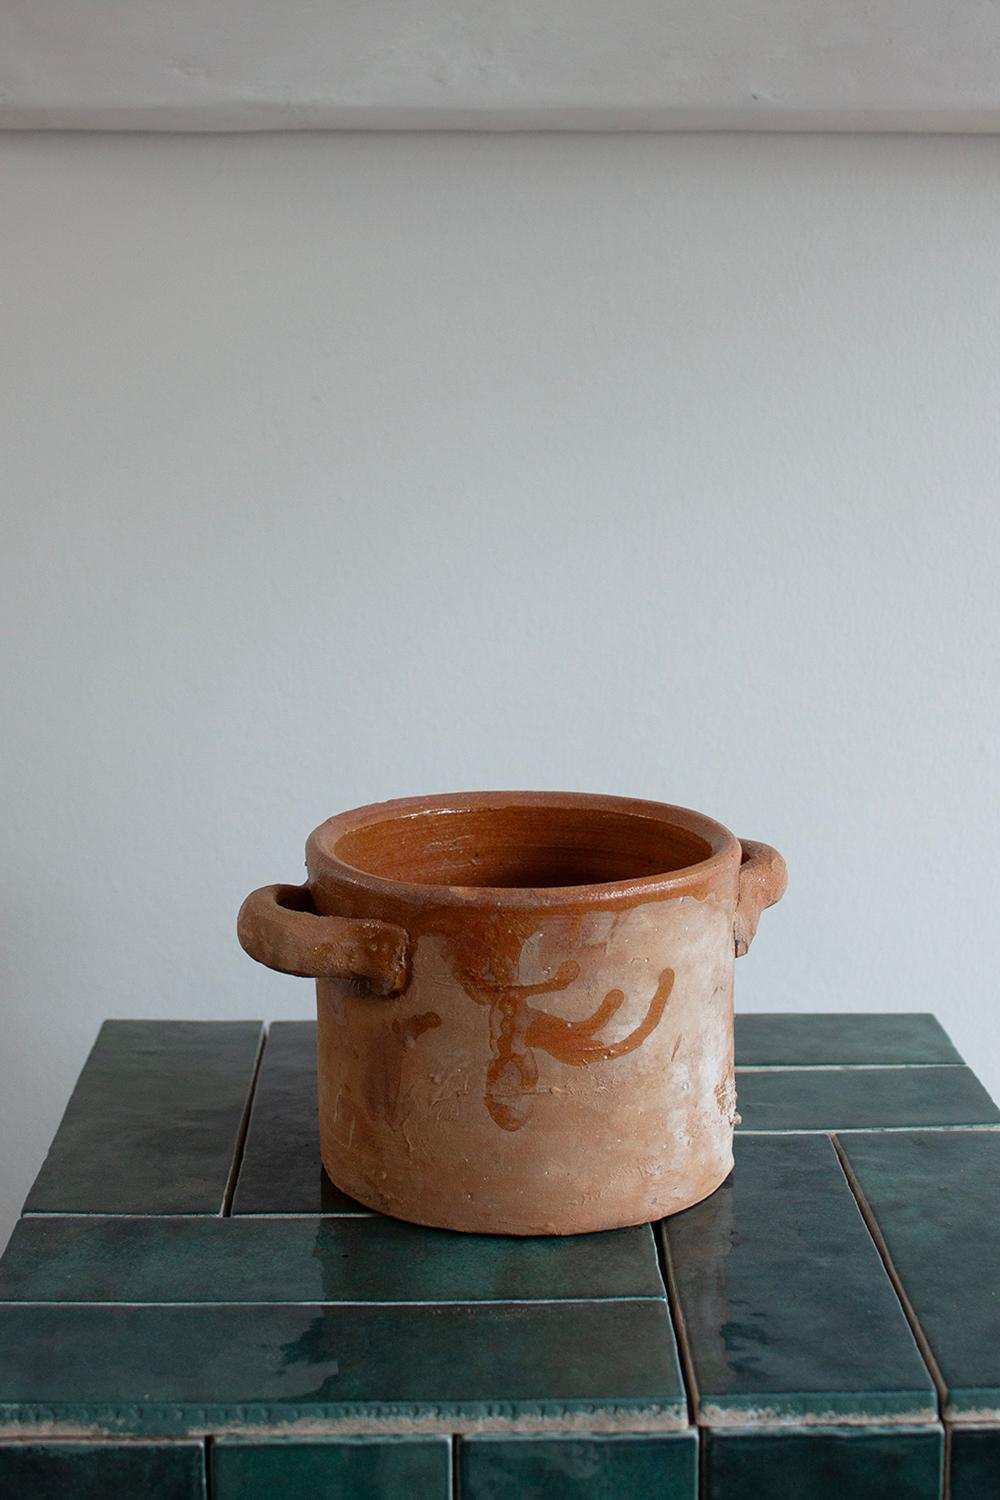 Shipping Note: If your region or country is not listed under the shipping options, please contact us directly.

This charming terracotta kitchen pot is glazed in beautiful dark brown, making it perfect for storing goods in the kitchen. The bowl